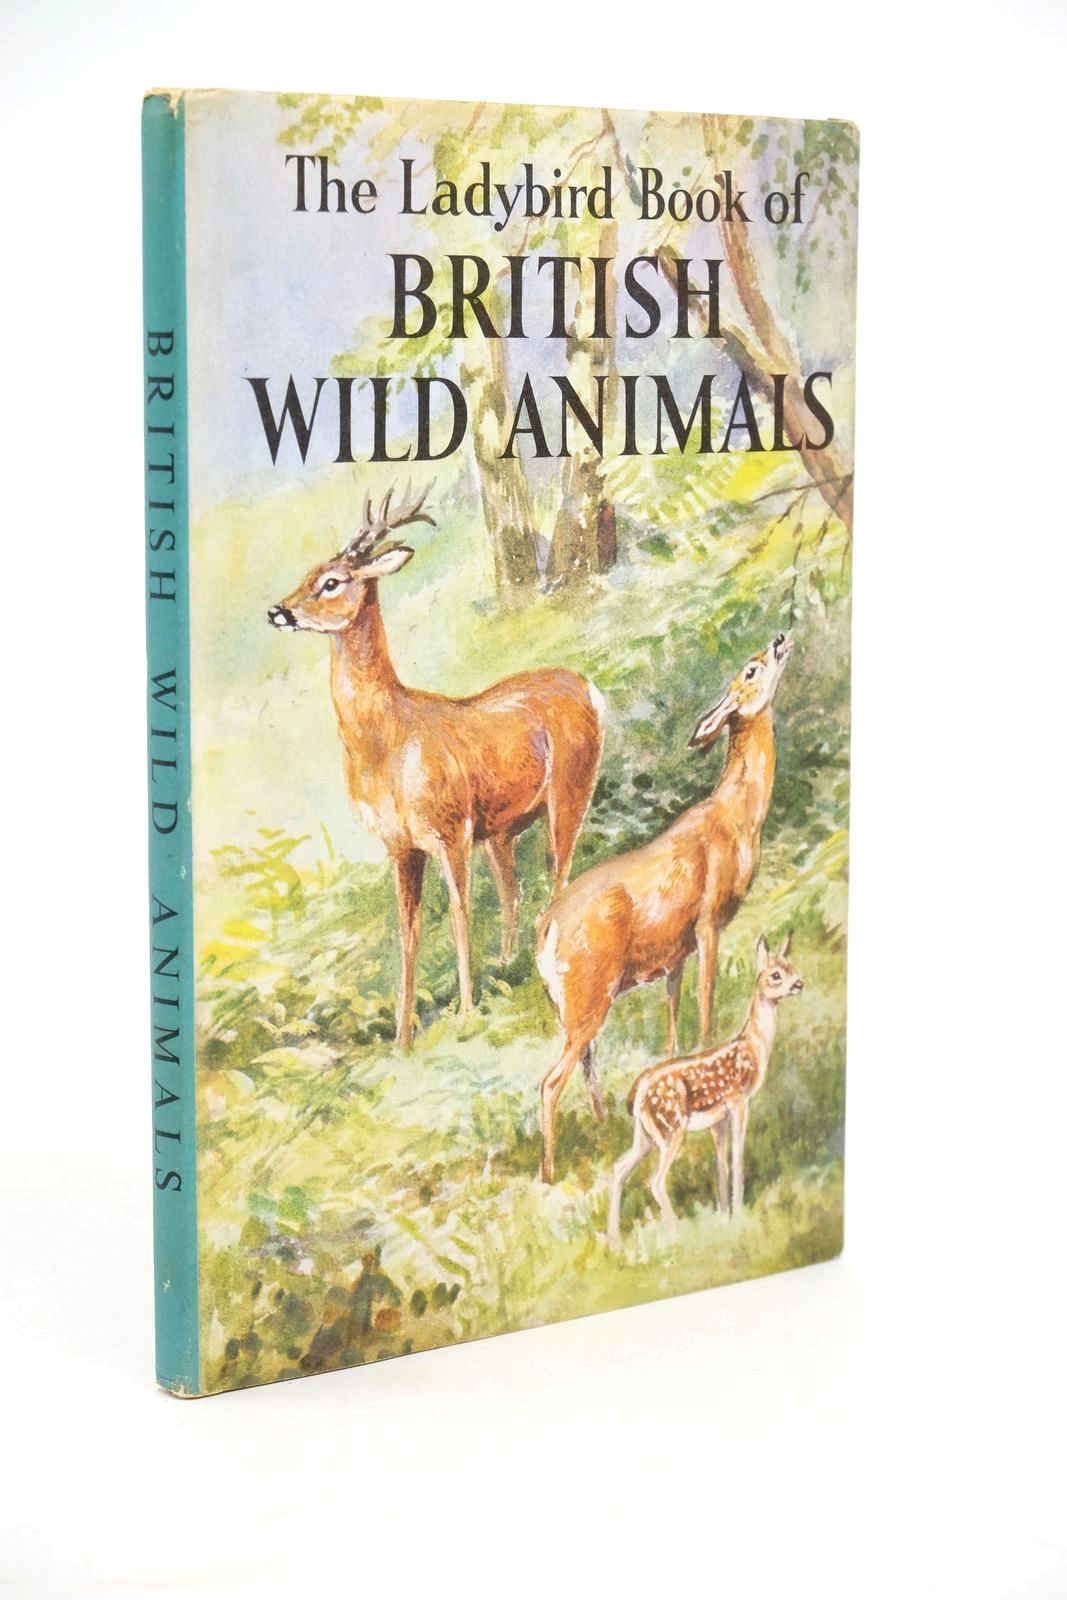 Photo of THE LADYBIRD BOOK OF BRITISH WILD ANIMALS written by Cansdale, George illustrated by Green, Roland published by Wills &amp; Hepworth Ltd. (STOCK CODE: 1323138)  for sale by Stella & Rose's Books